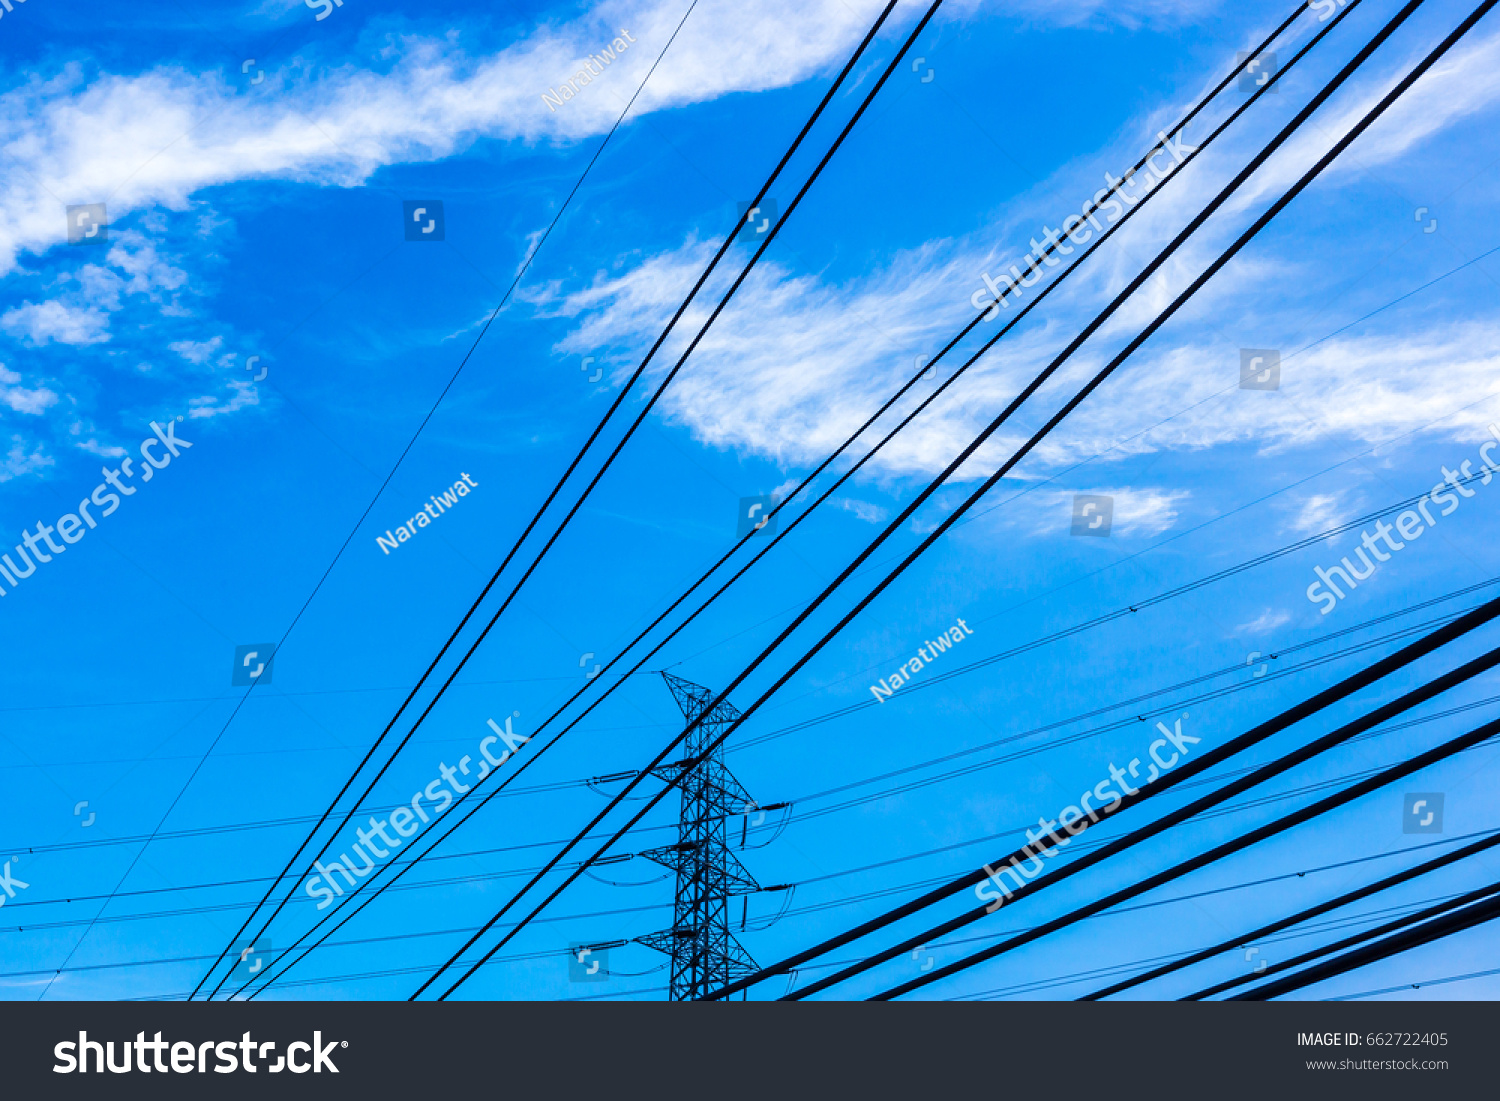 Silhouette electric pole  with  blue sky and clouds  #662722405